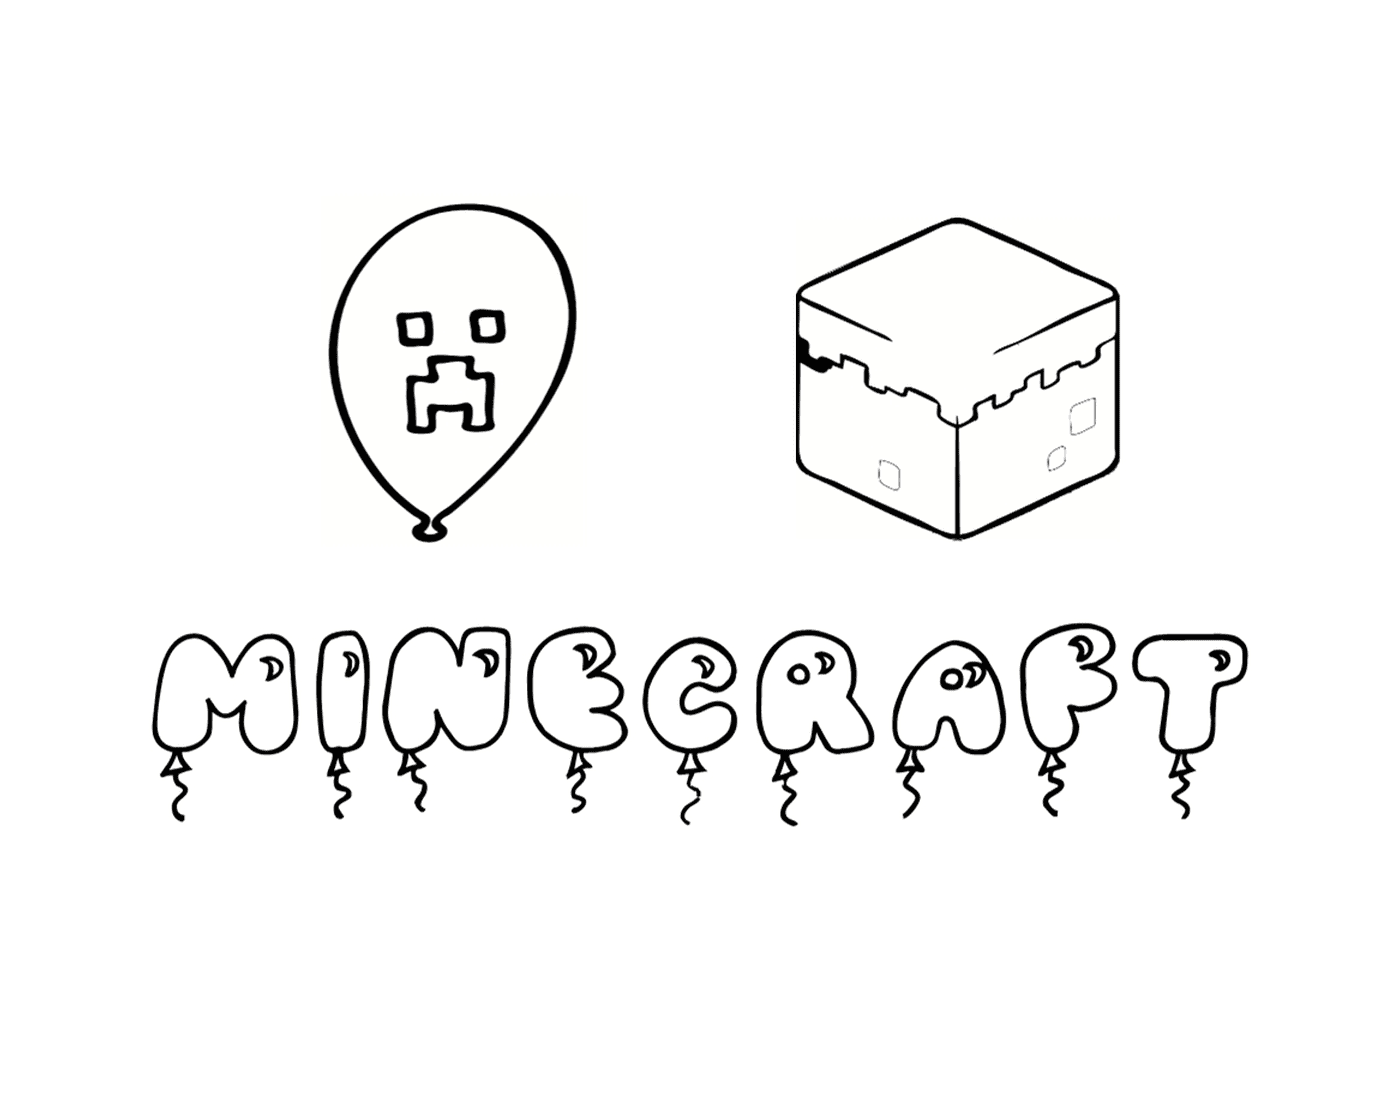  Minecraft shaped balloons for an anniversary 